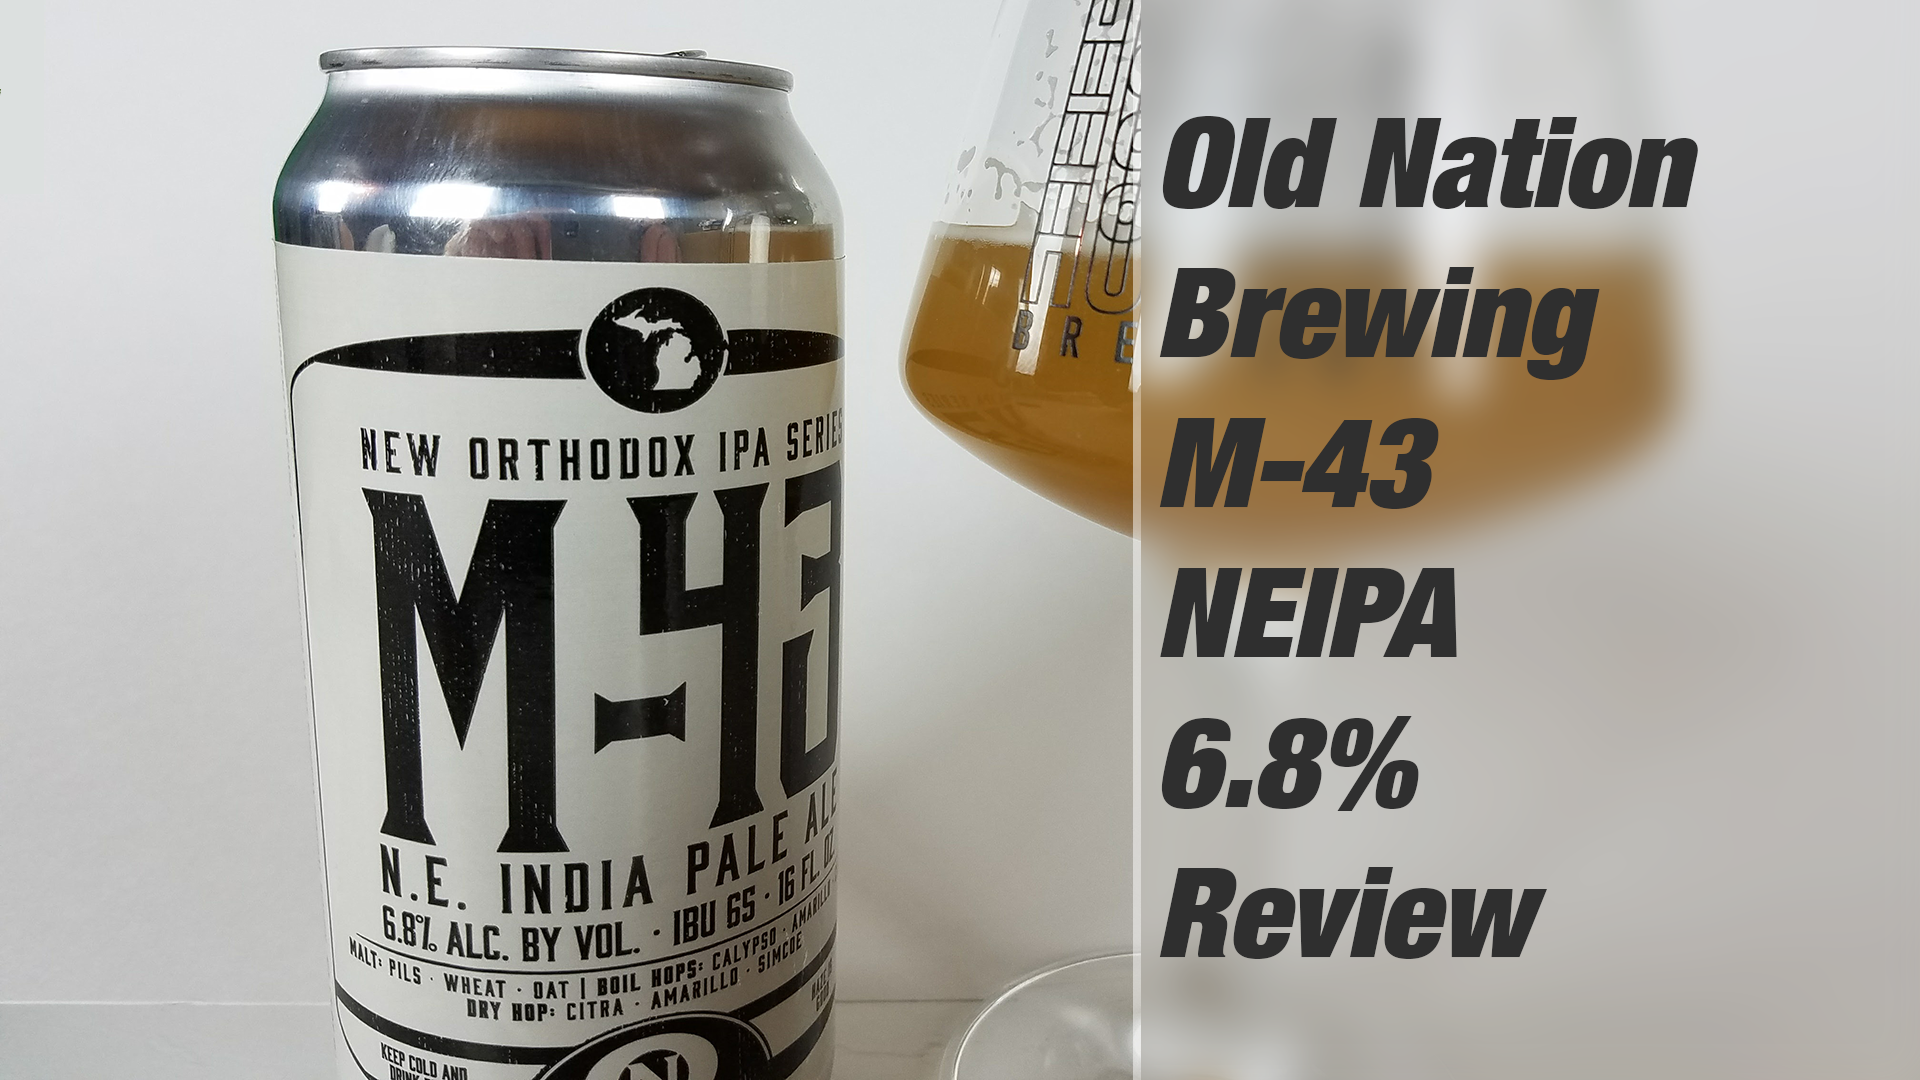 You are currently viewing Old Nation Brewing – M-43 NEIPA Review